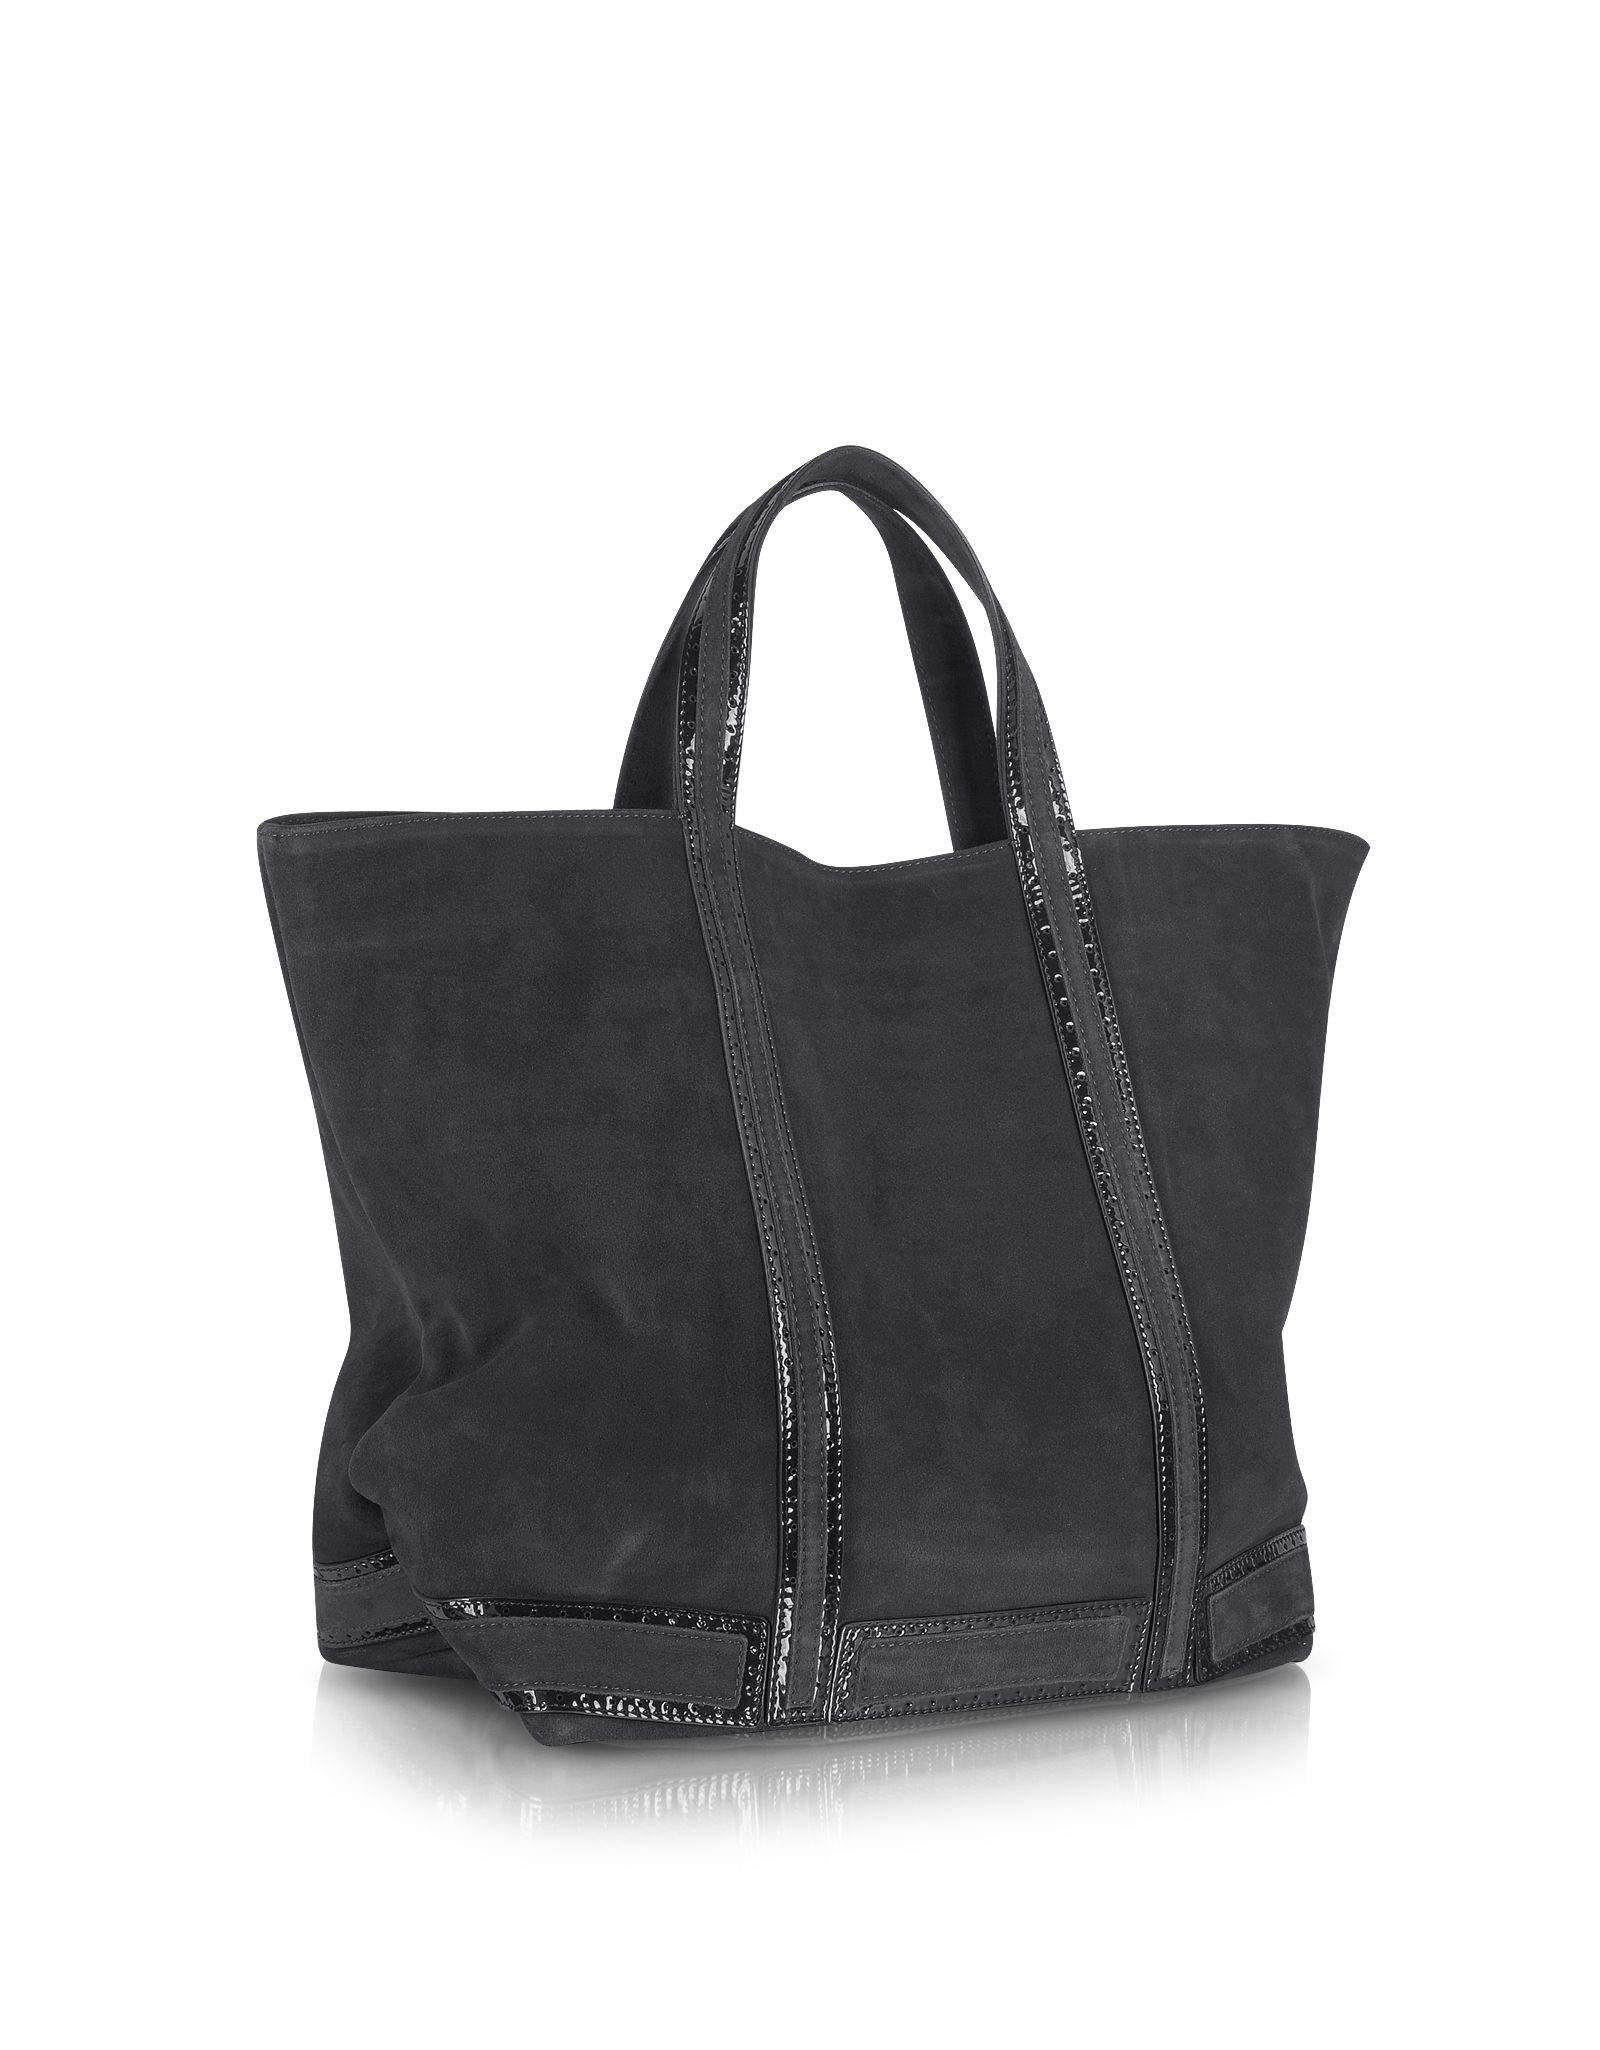 Vanessa bruno Large Suede and Patent Leather Tote in Black | Lyst